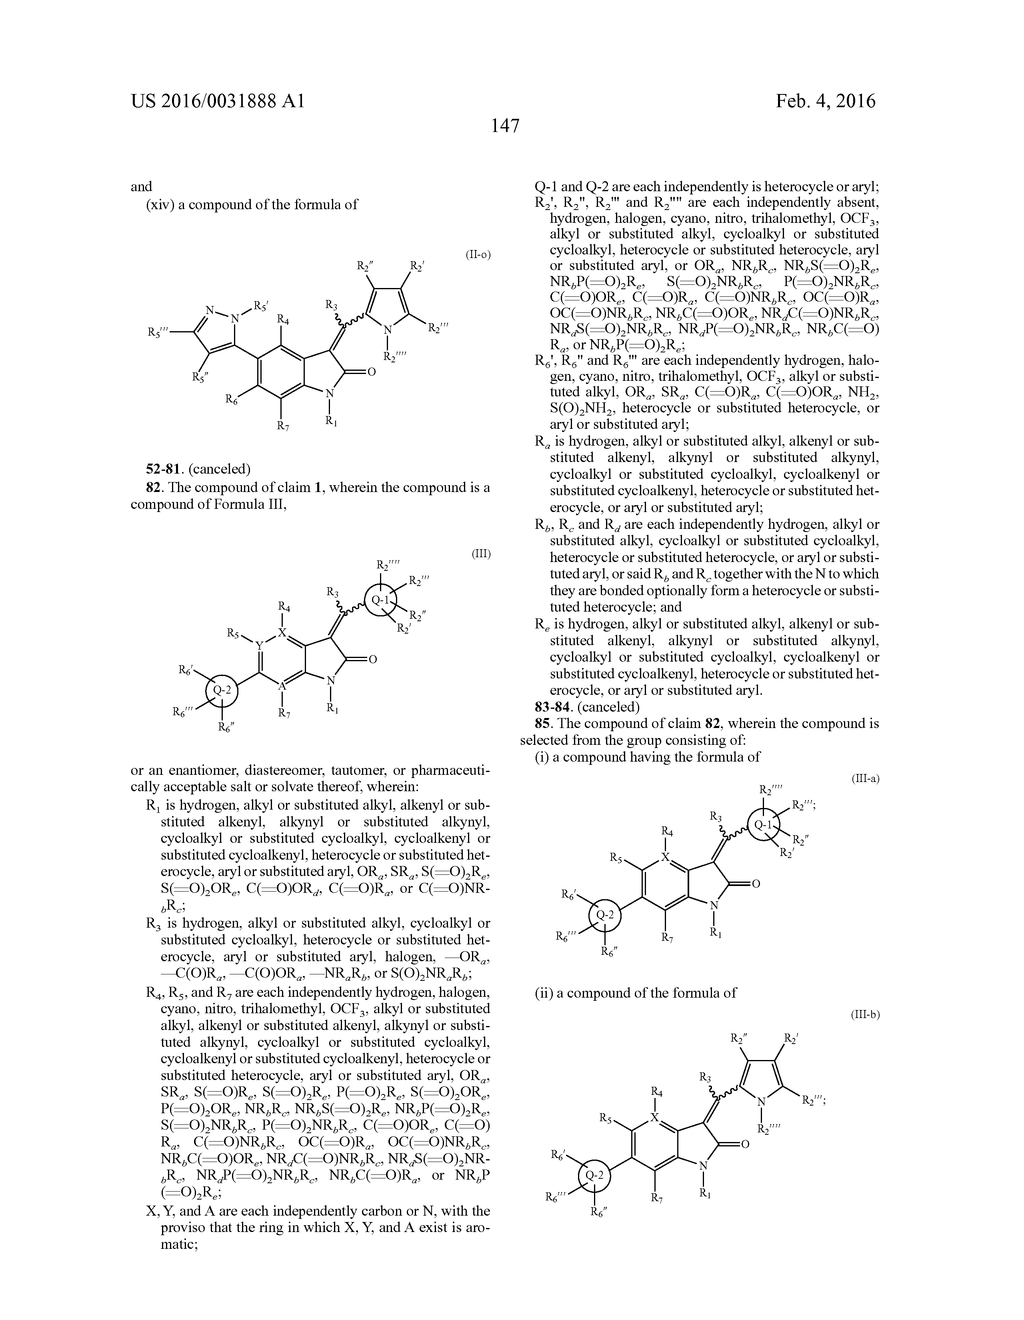 3-(ARYL OR HETEROARYL) METHYLENEINDOLIN-2-ONE DERIVATIVES AS INHIBITORS OF     CANCER STEM CELL PATHWAY KINASES FOR THE TREATMENT OF CANCER - diagram, schematic, and image 149